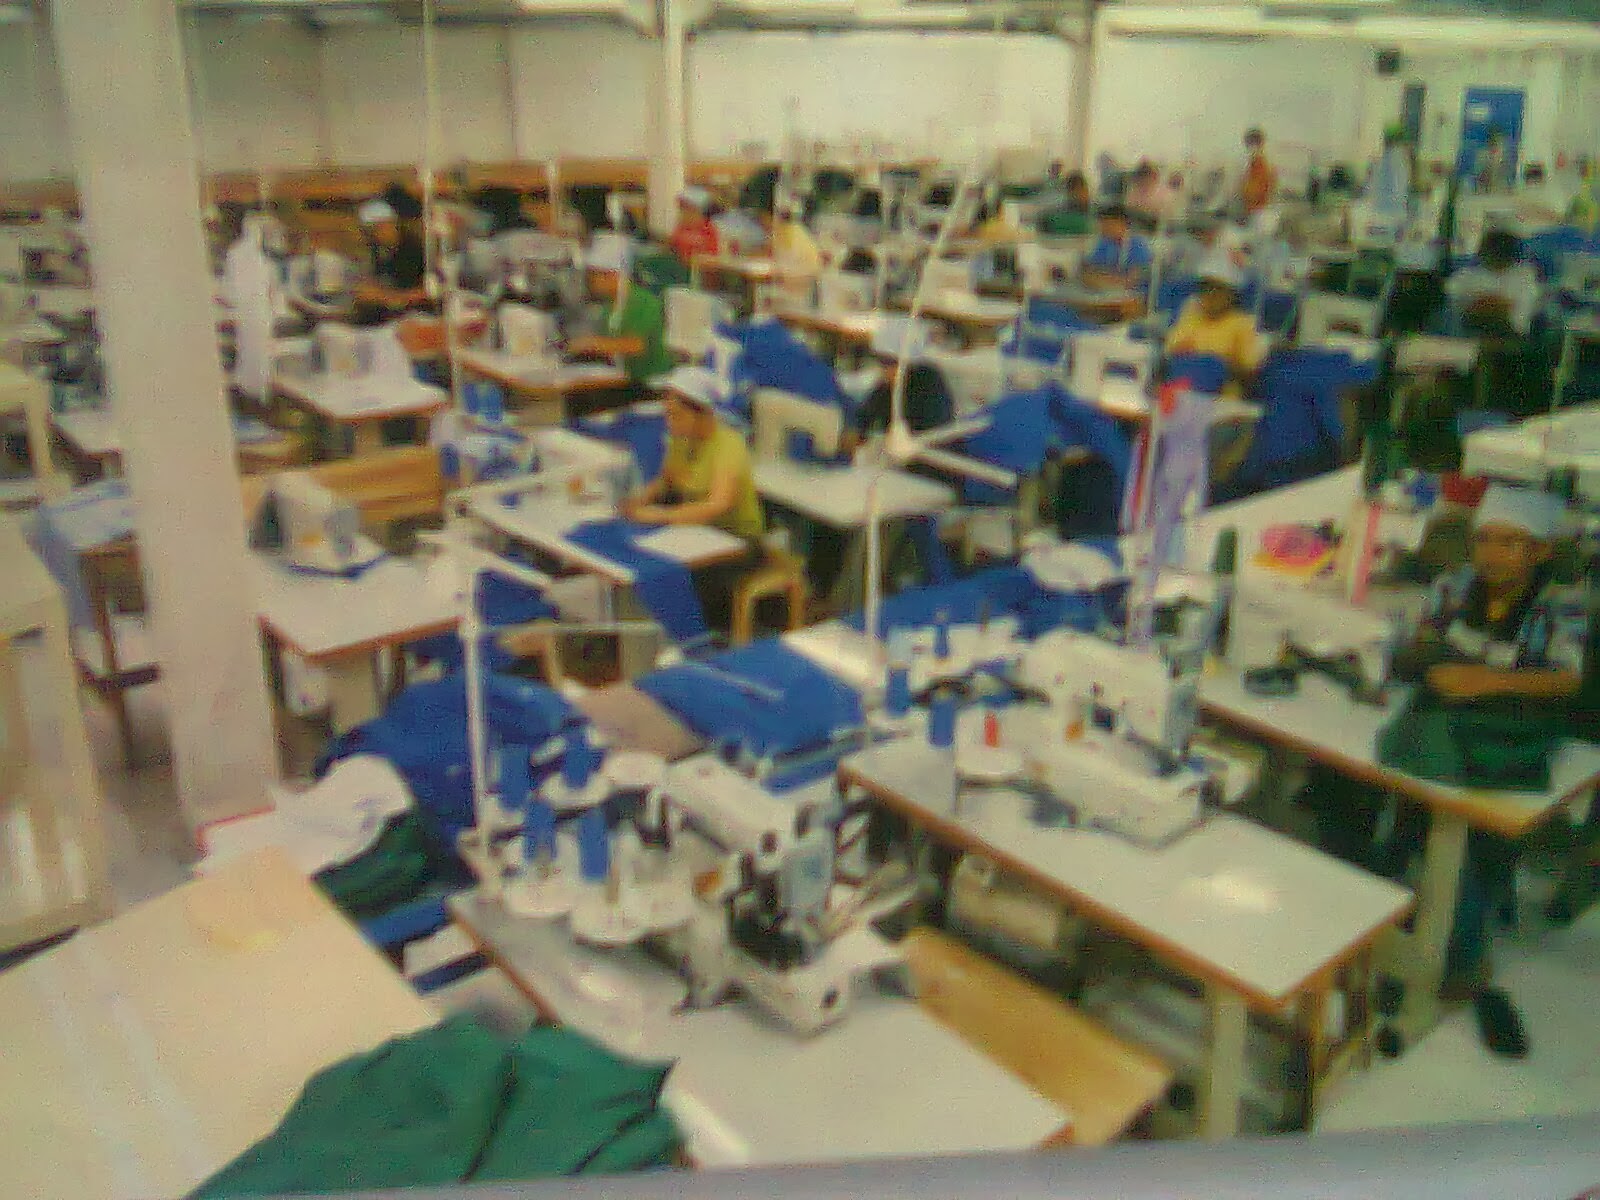 We have 123 employees and 159 machines as supporting production